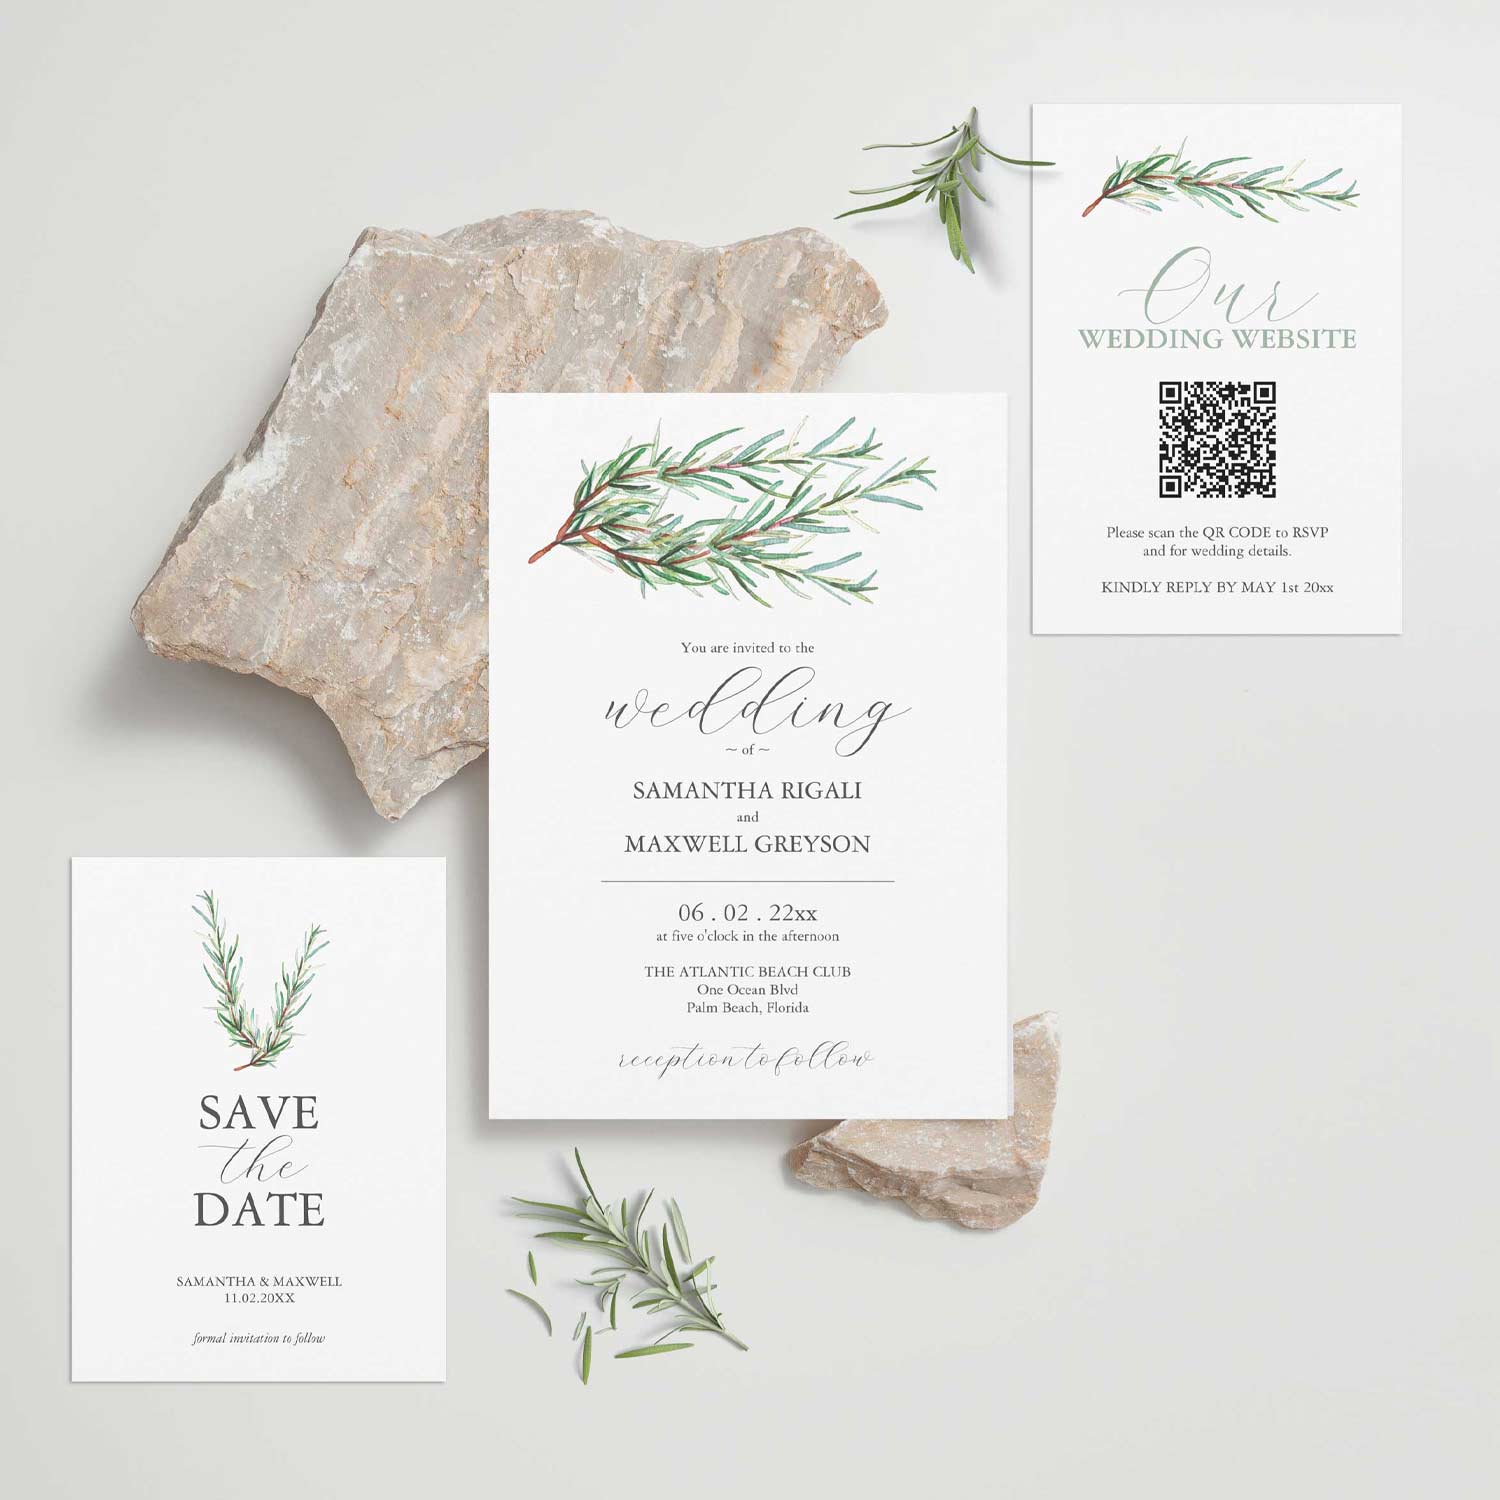 Wedding stationery features watercolor rosemary botanical art by Victoria Grigaliunas of Do Tell A Belle. Click to shop this theme in printed cards or a printable file.